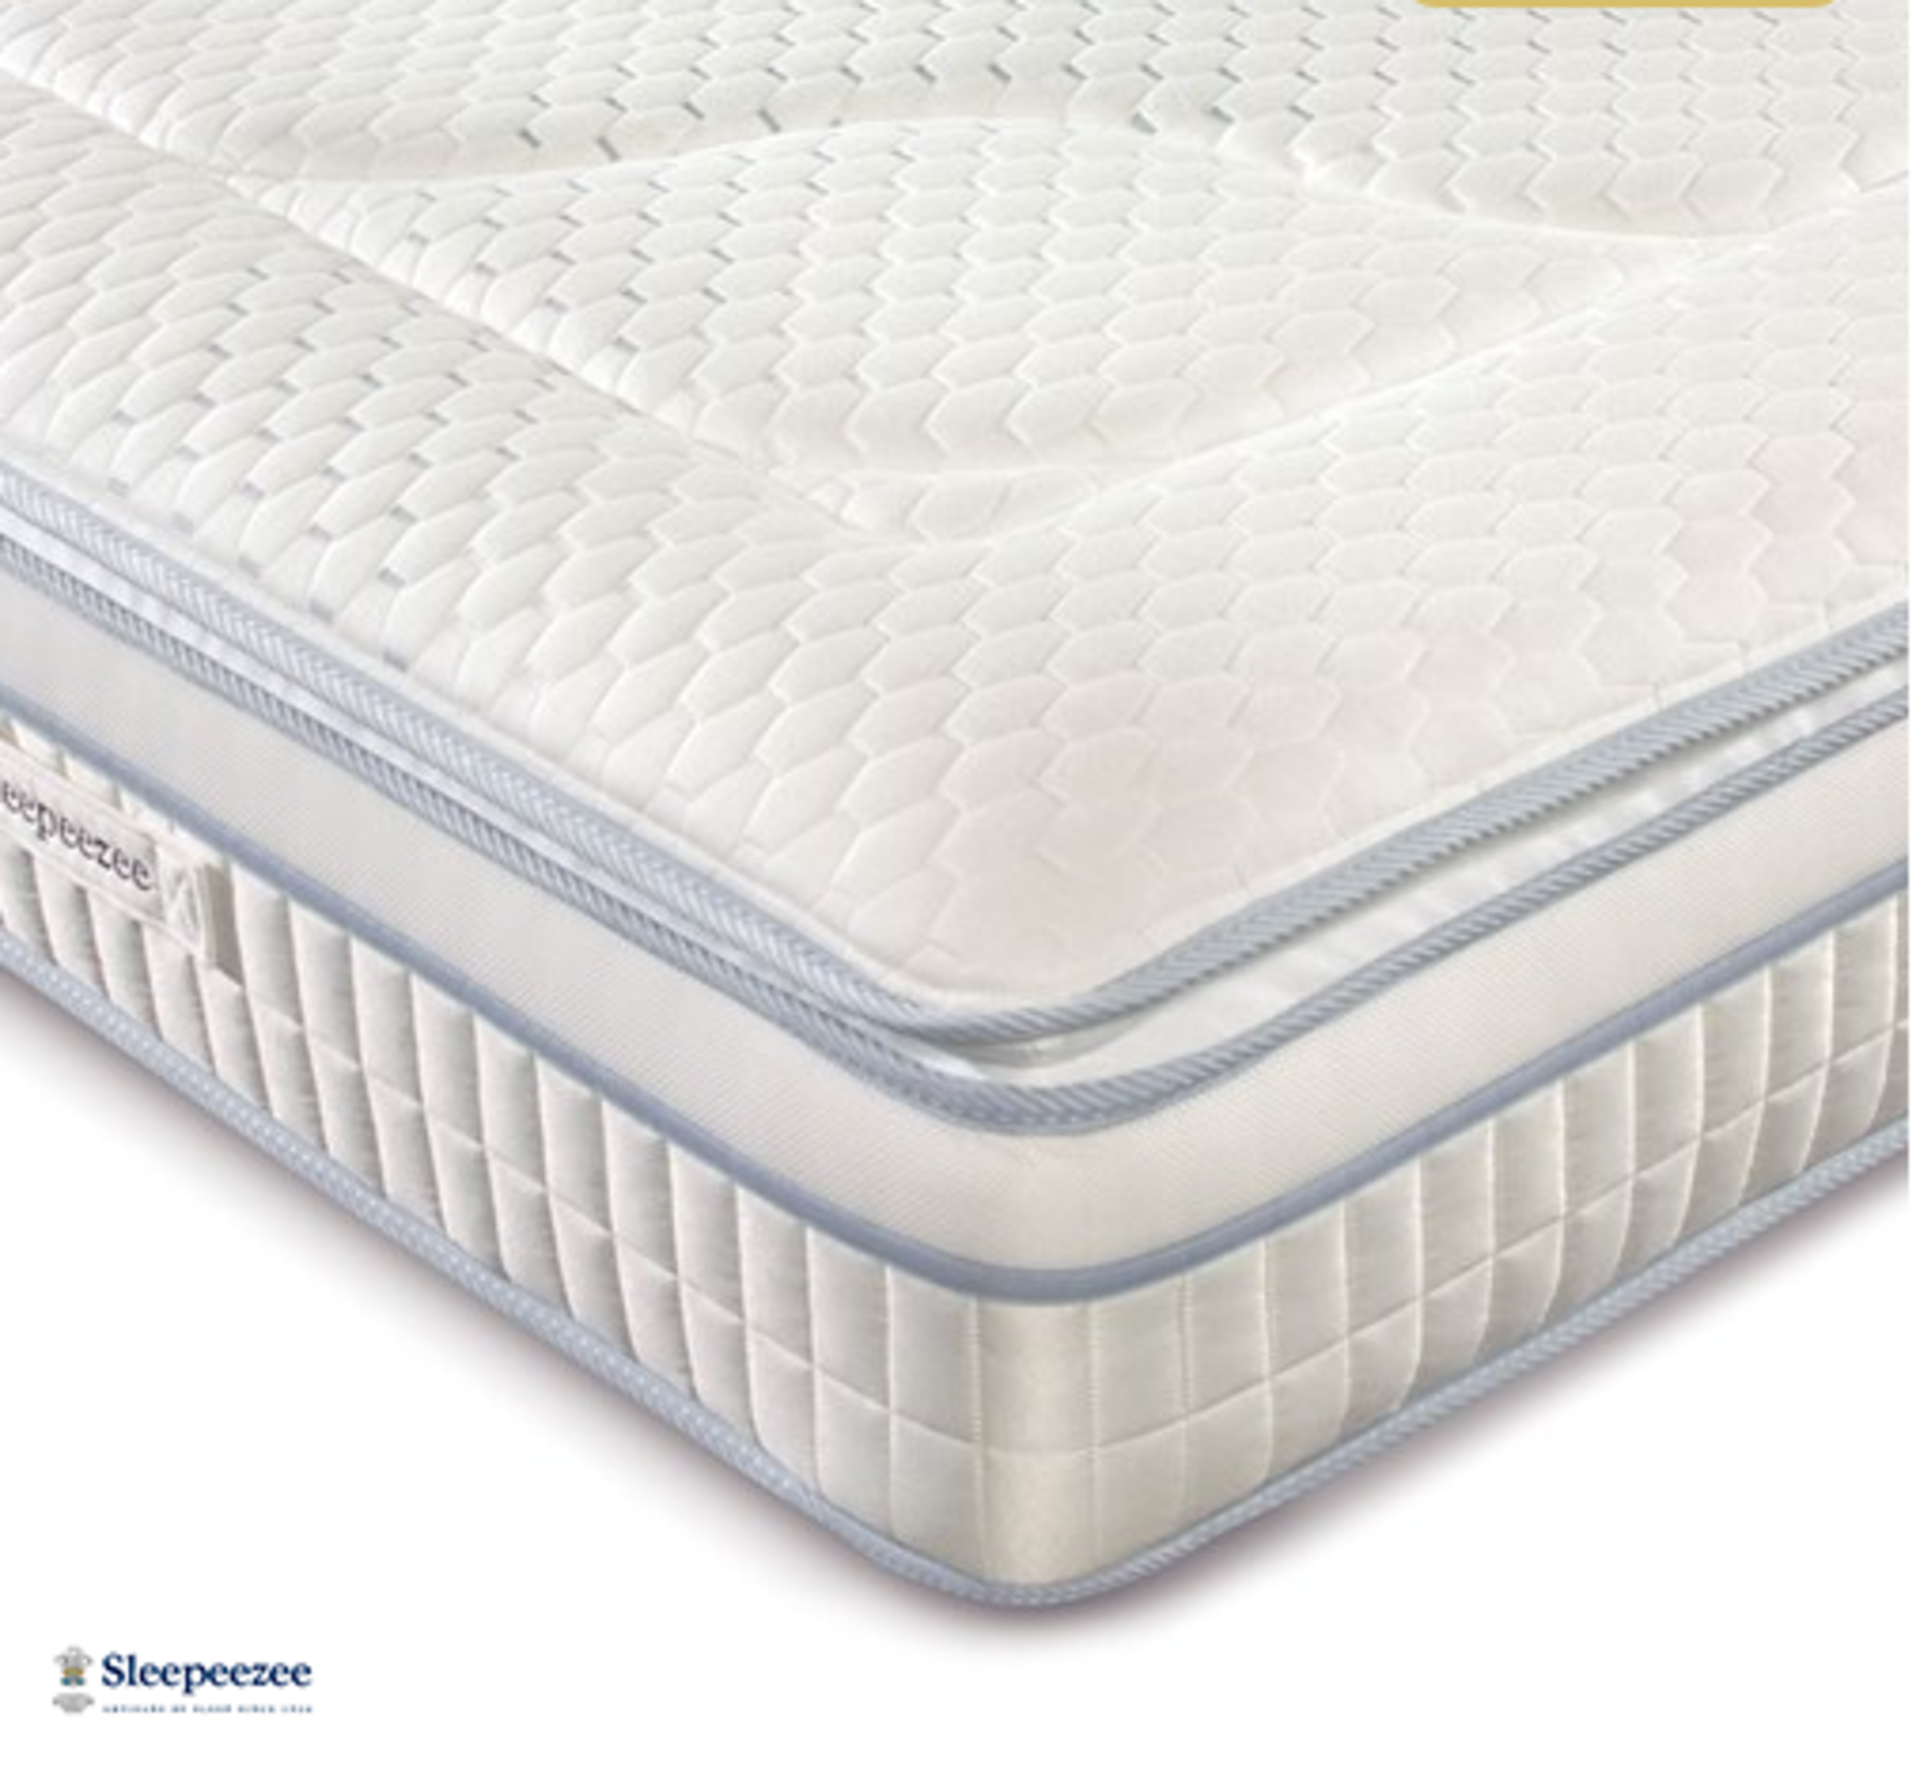 1X | SLEEPRIGHT SILENTNIGHT ORCHID 1200 SINGLE 3FT 90CM MATTRESS | DIRTY MARKS PRESENT DUE TO NO